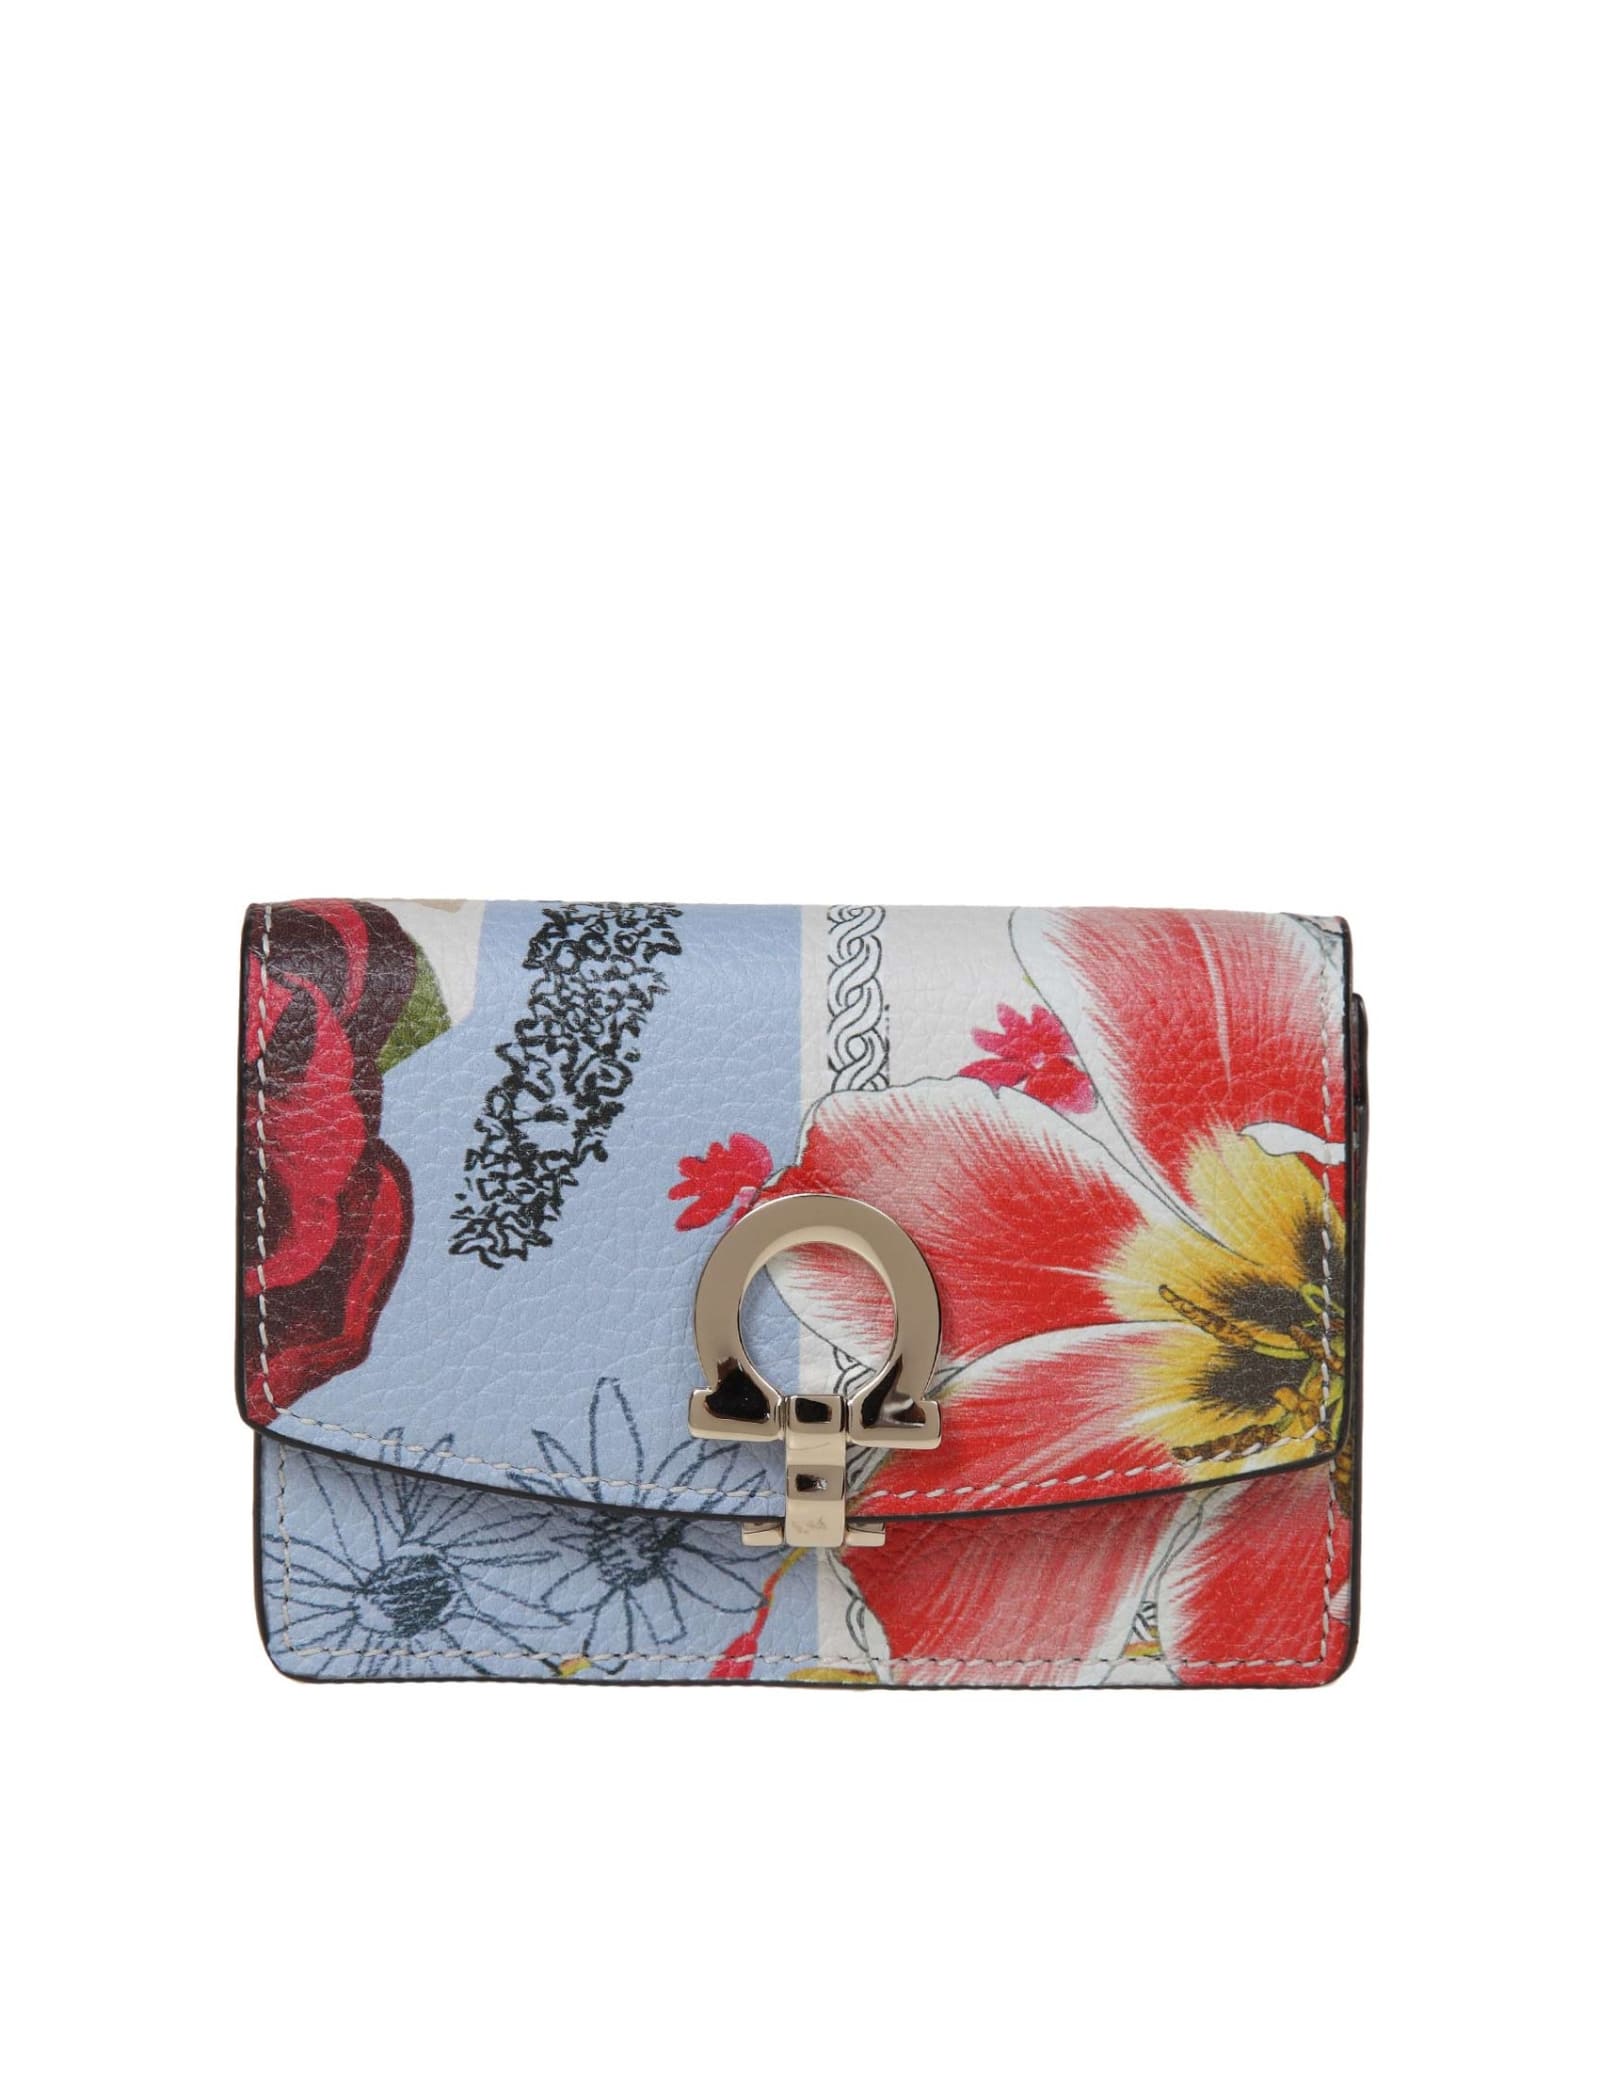 Salvatore Ferragamo Leather Card Holder With Floral Print